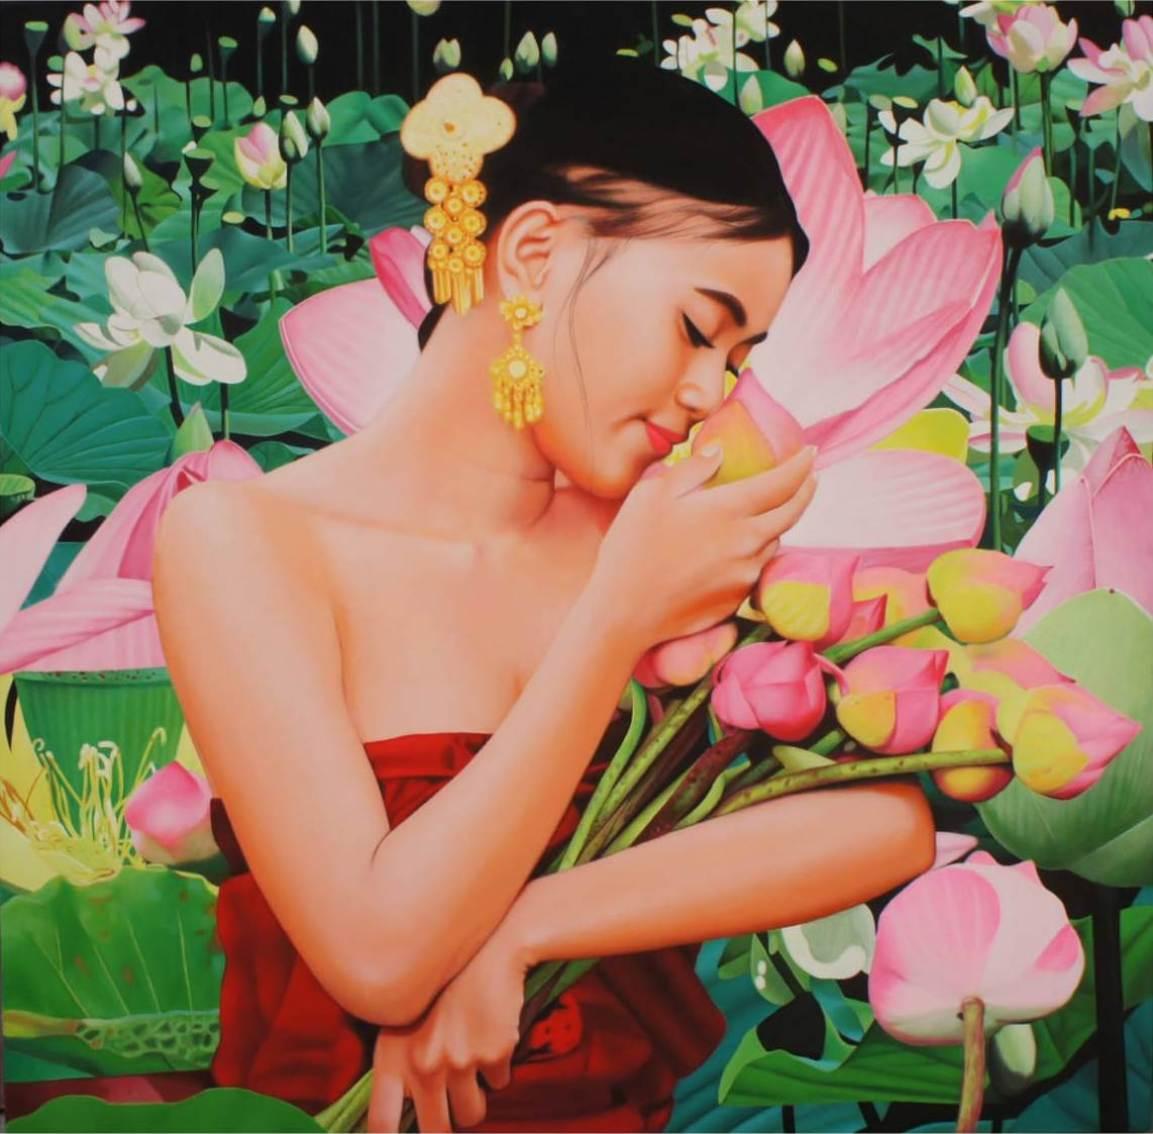 Oinam Dilip Figurative Painting - Lake of Purity, Oil on Canvas by Contemporary Indian Artist "In Stock"